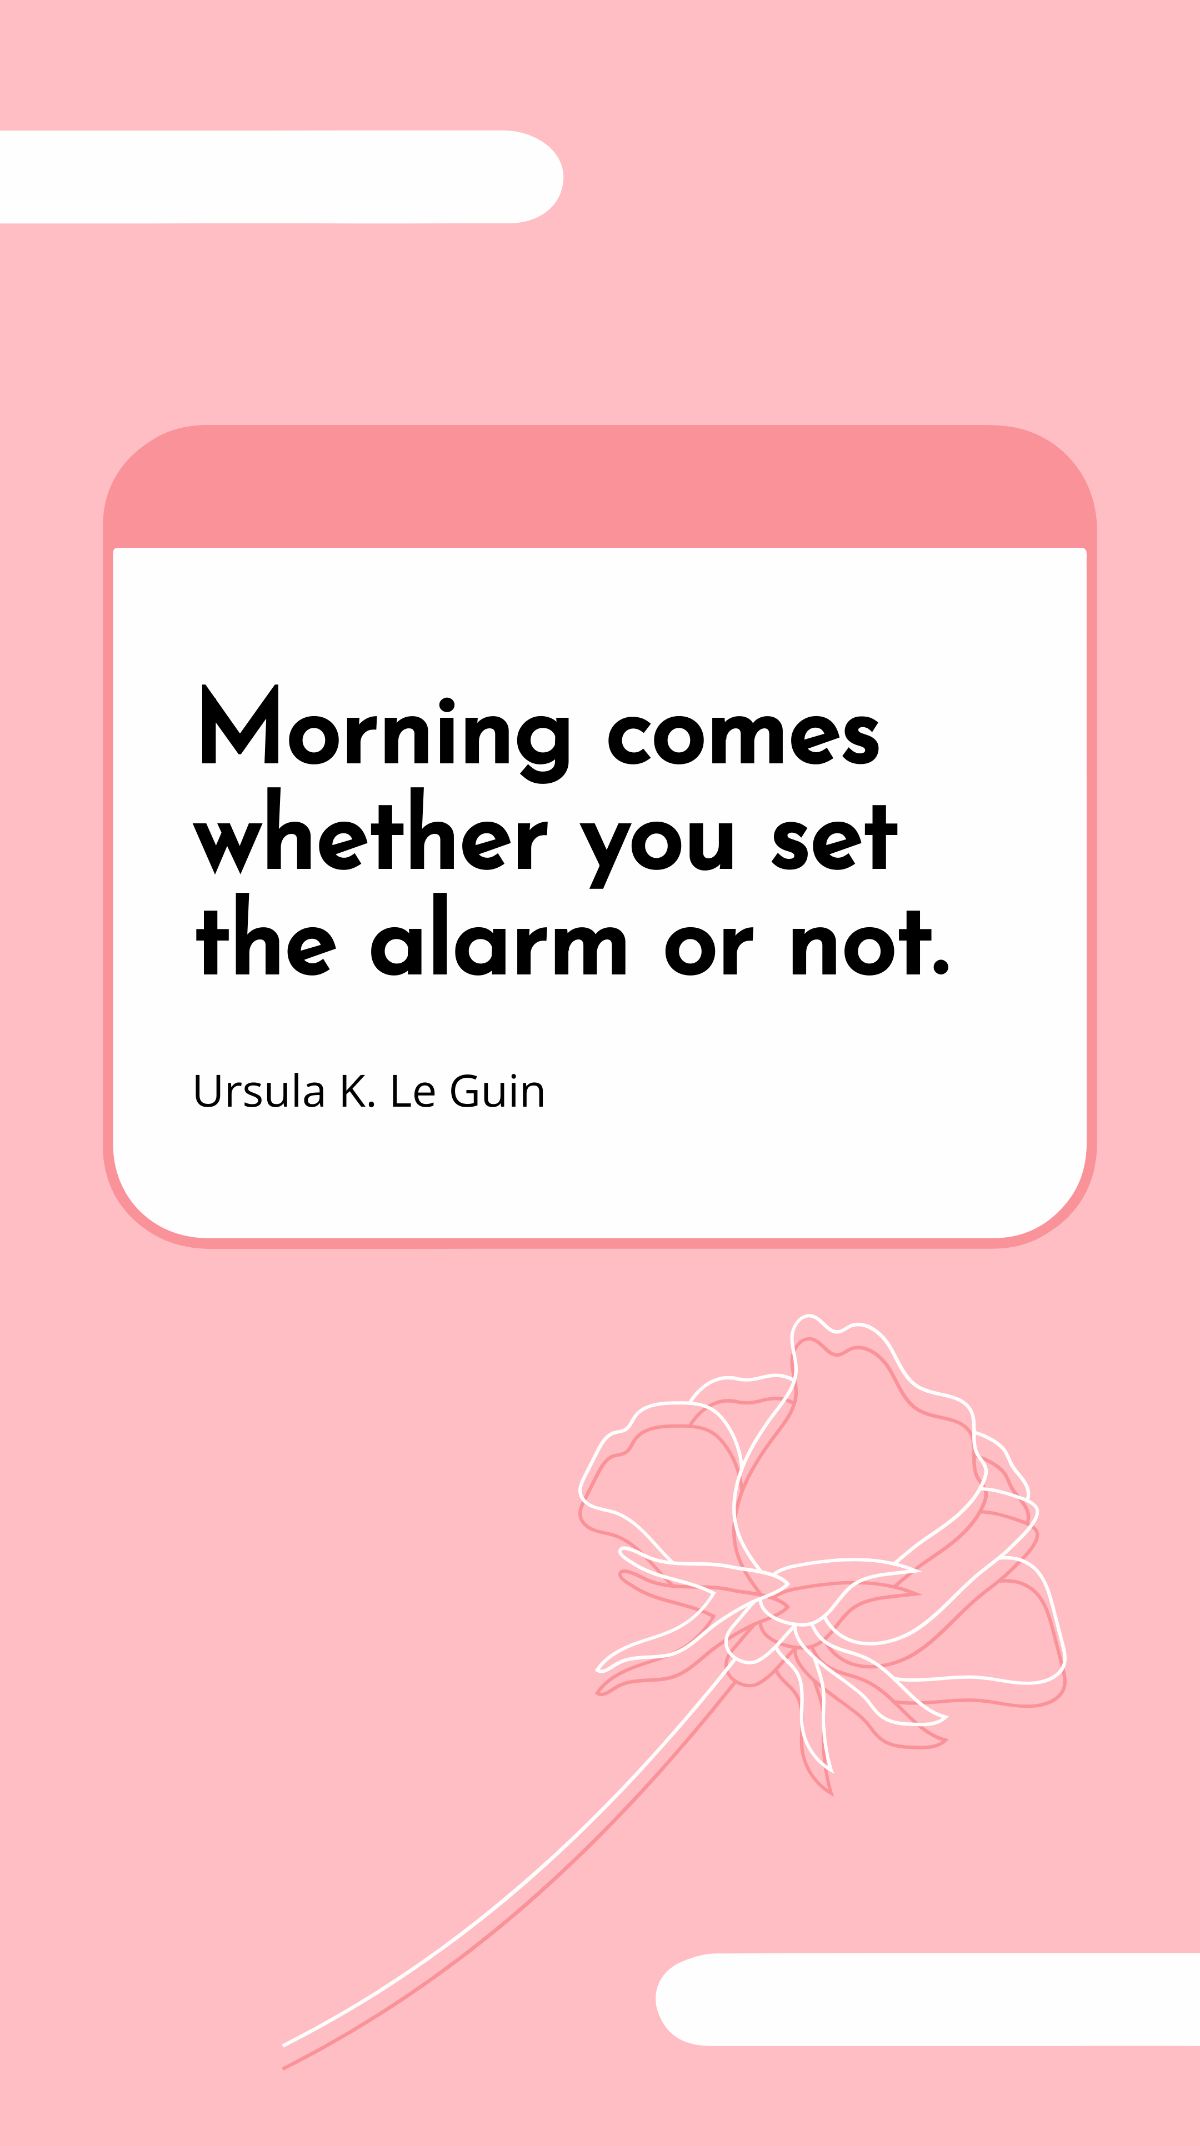 Ursula K. Le Guin - Morning comes whether you set the alarm or not. Template